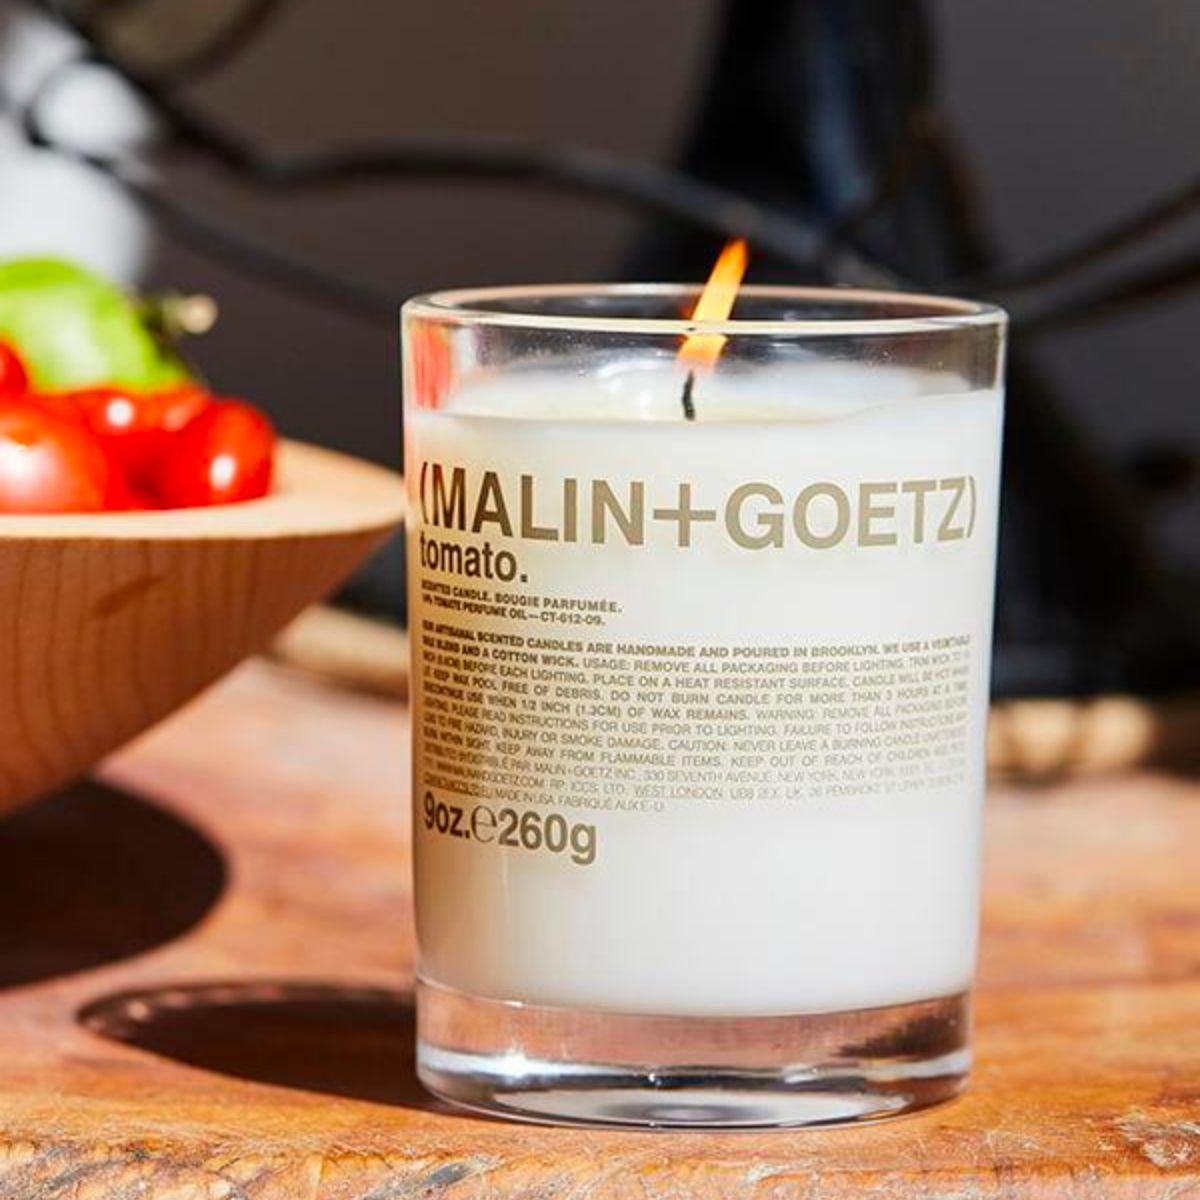 Image of Tomato scented candle by the brand Malin+Goetz